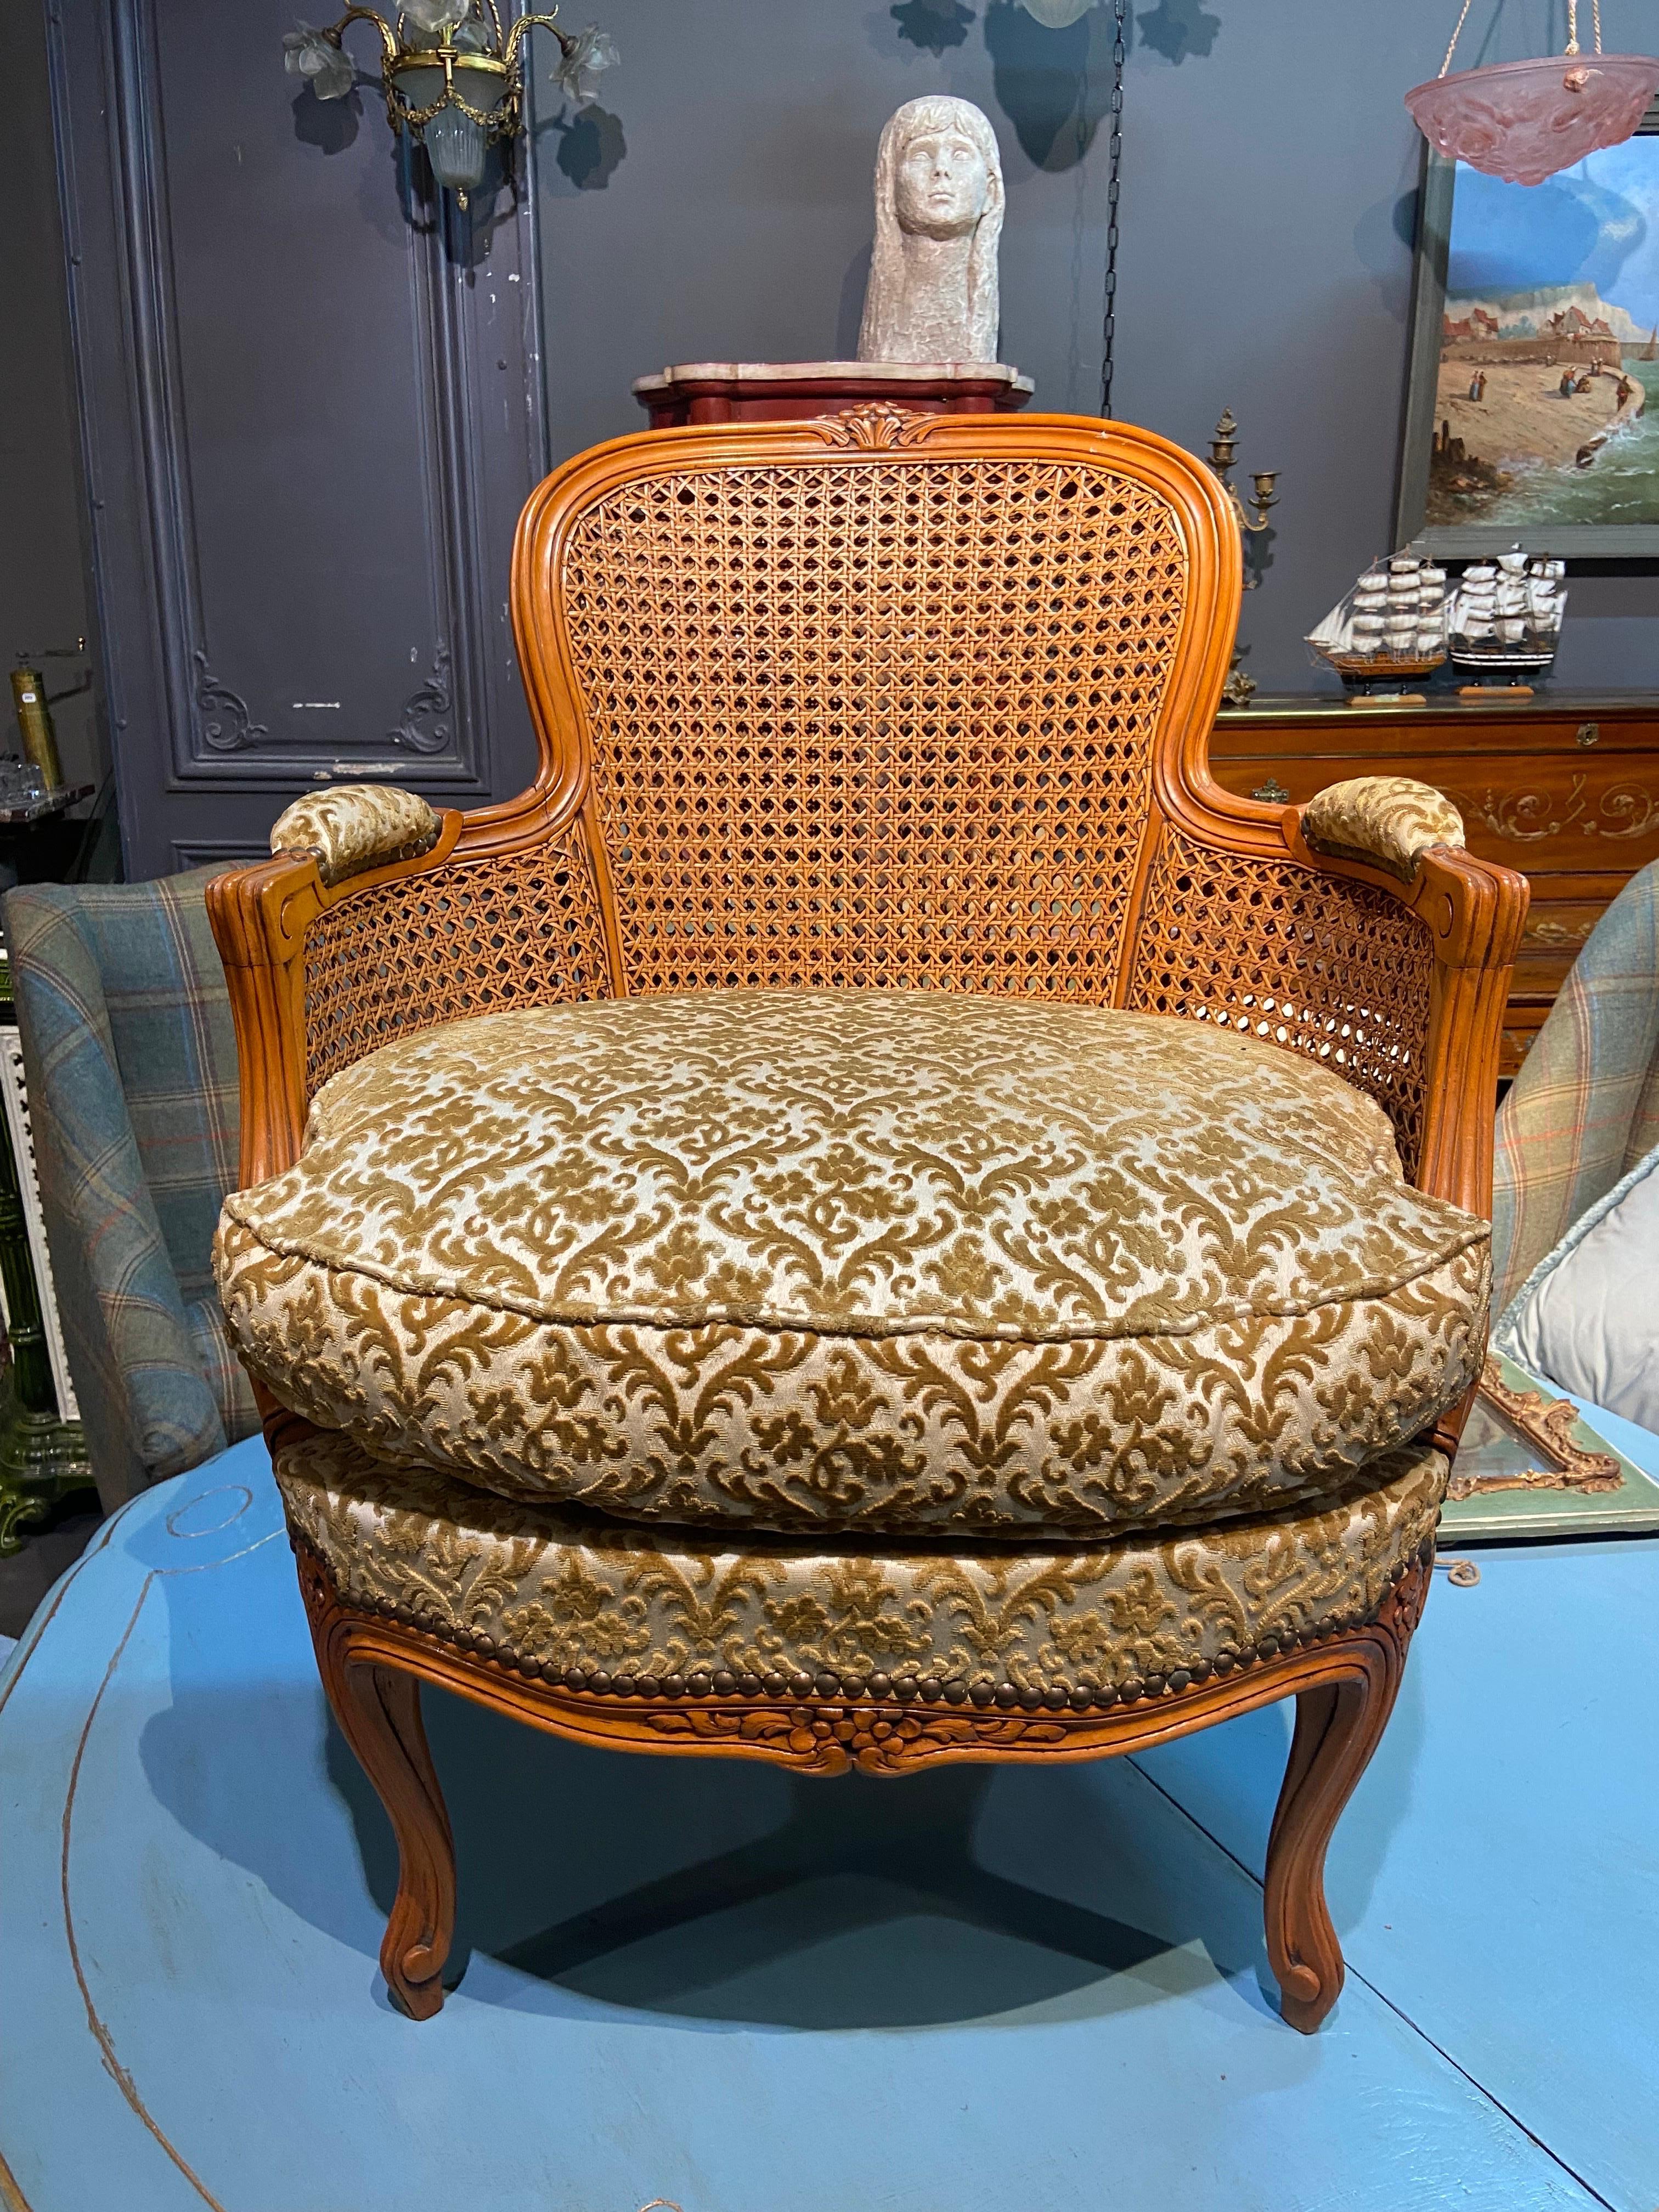 Petite French round armchair, in Louis XVI style hand carved and decorated with friezes of ribbons tapered fluted base, with dobble cane back and sides. Upholstered in mustard velvet. Very good condition. 
France, circa 1880.